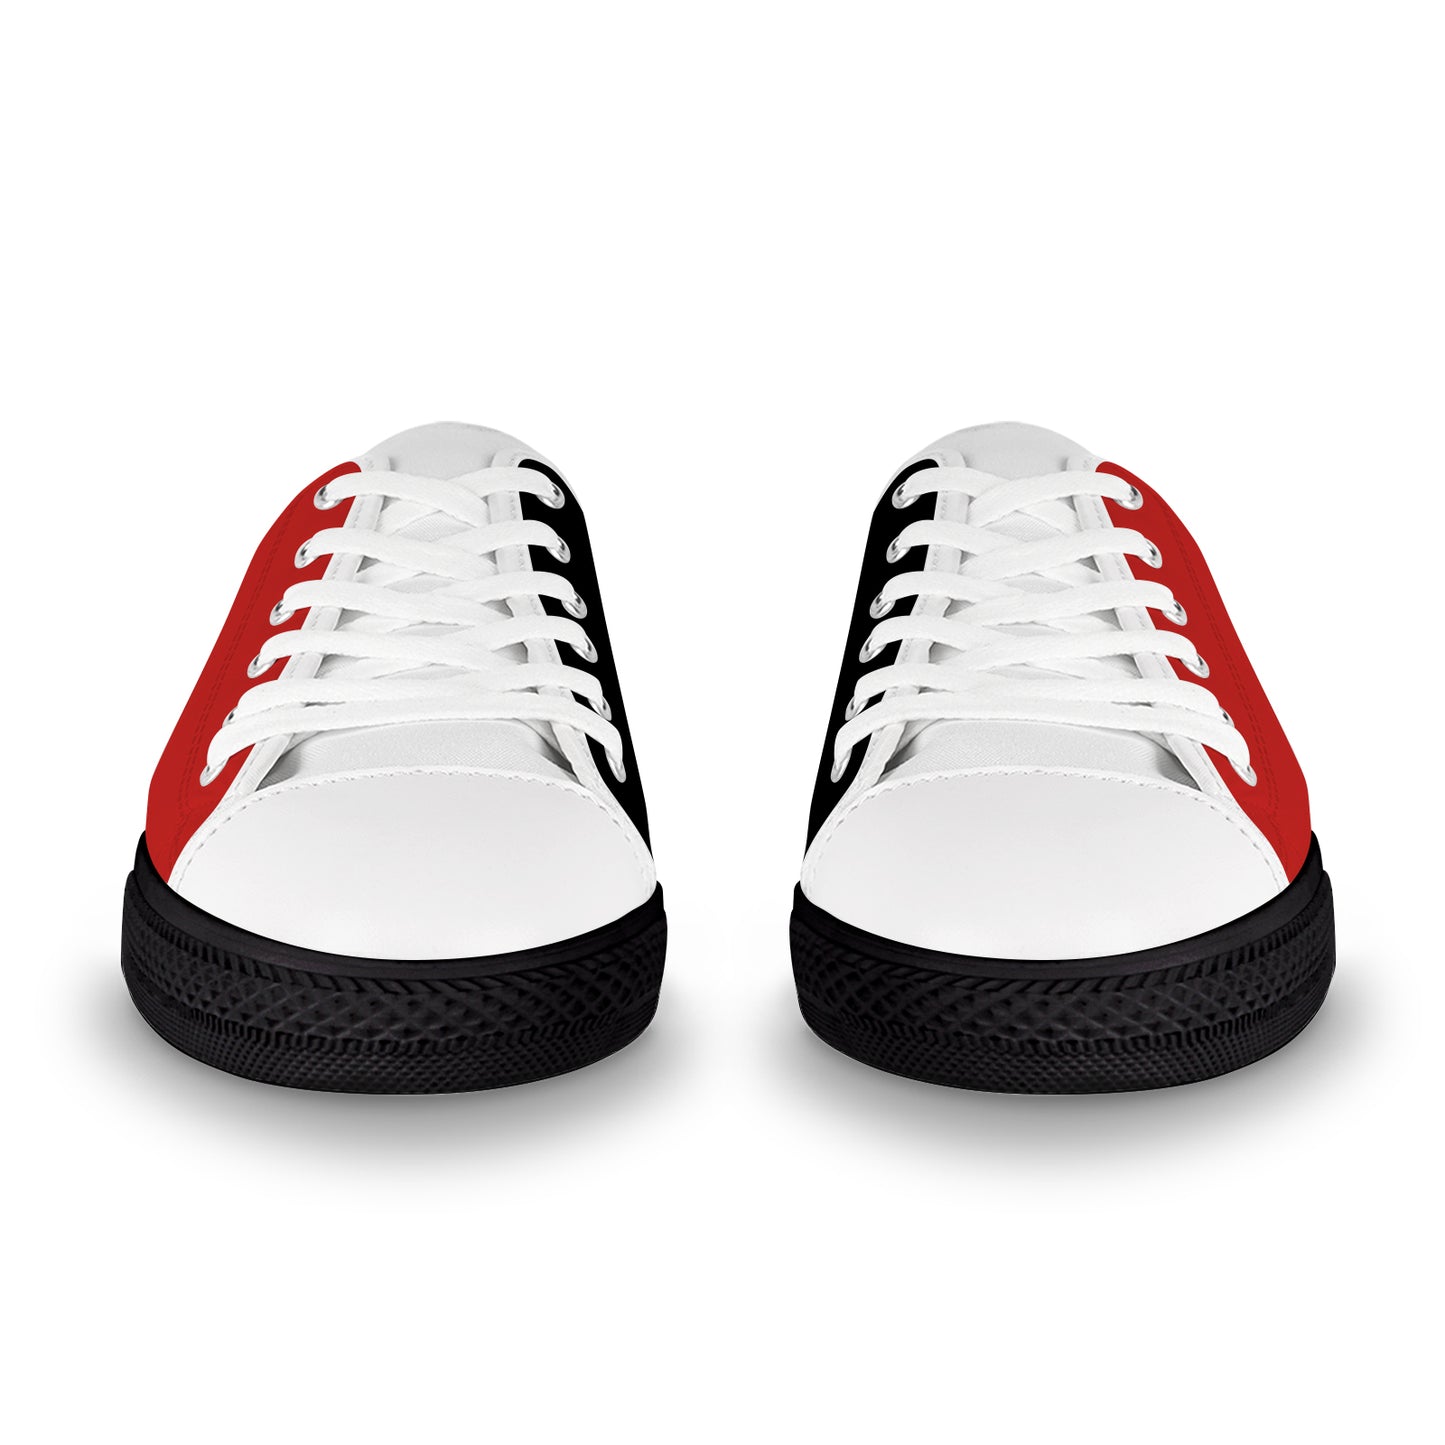 Men's Canvas Sneakers - Classic Red